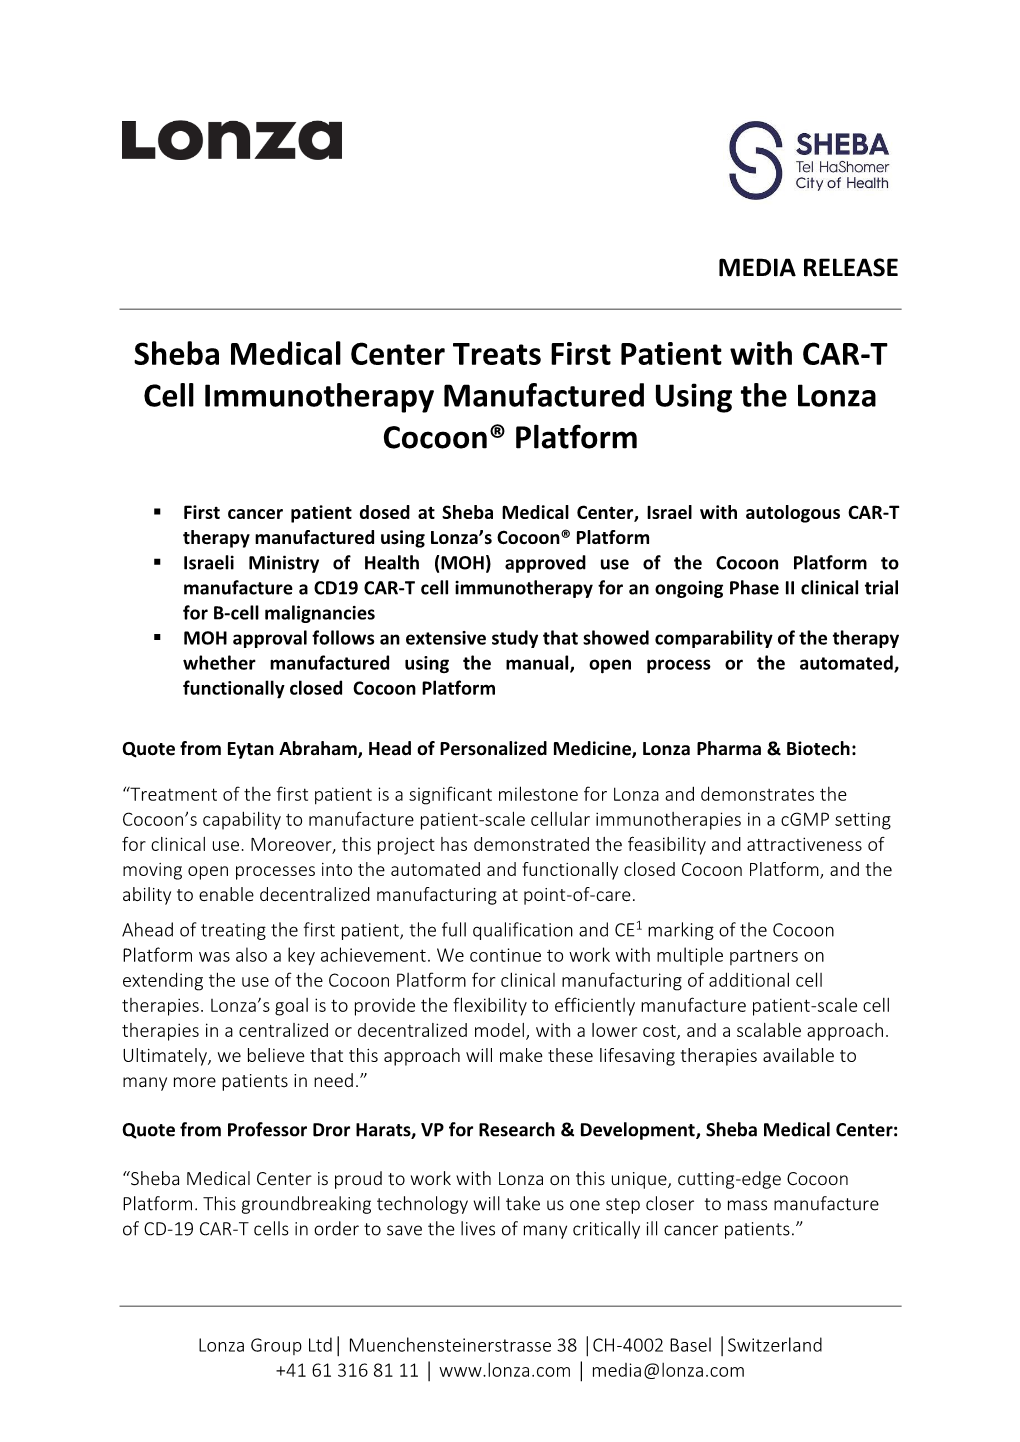 Sheba Medical Center Treats First Patient with CAR-T Cell Immunotherapy Manufactured Using the Lonza Cocoon® Platform